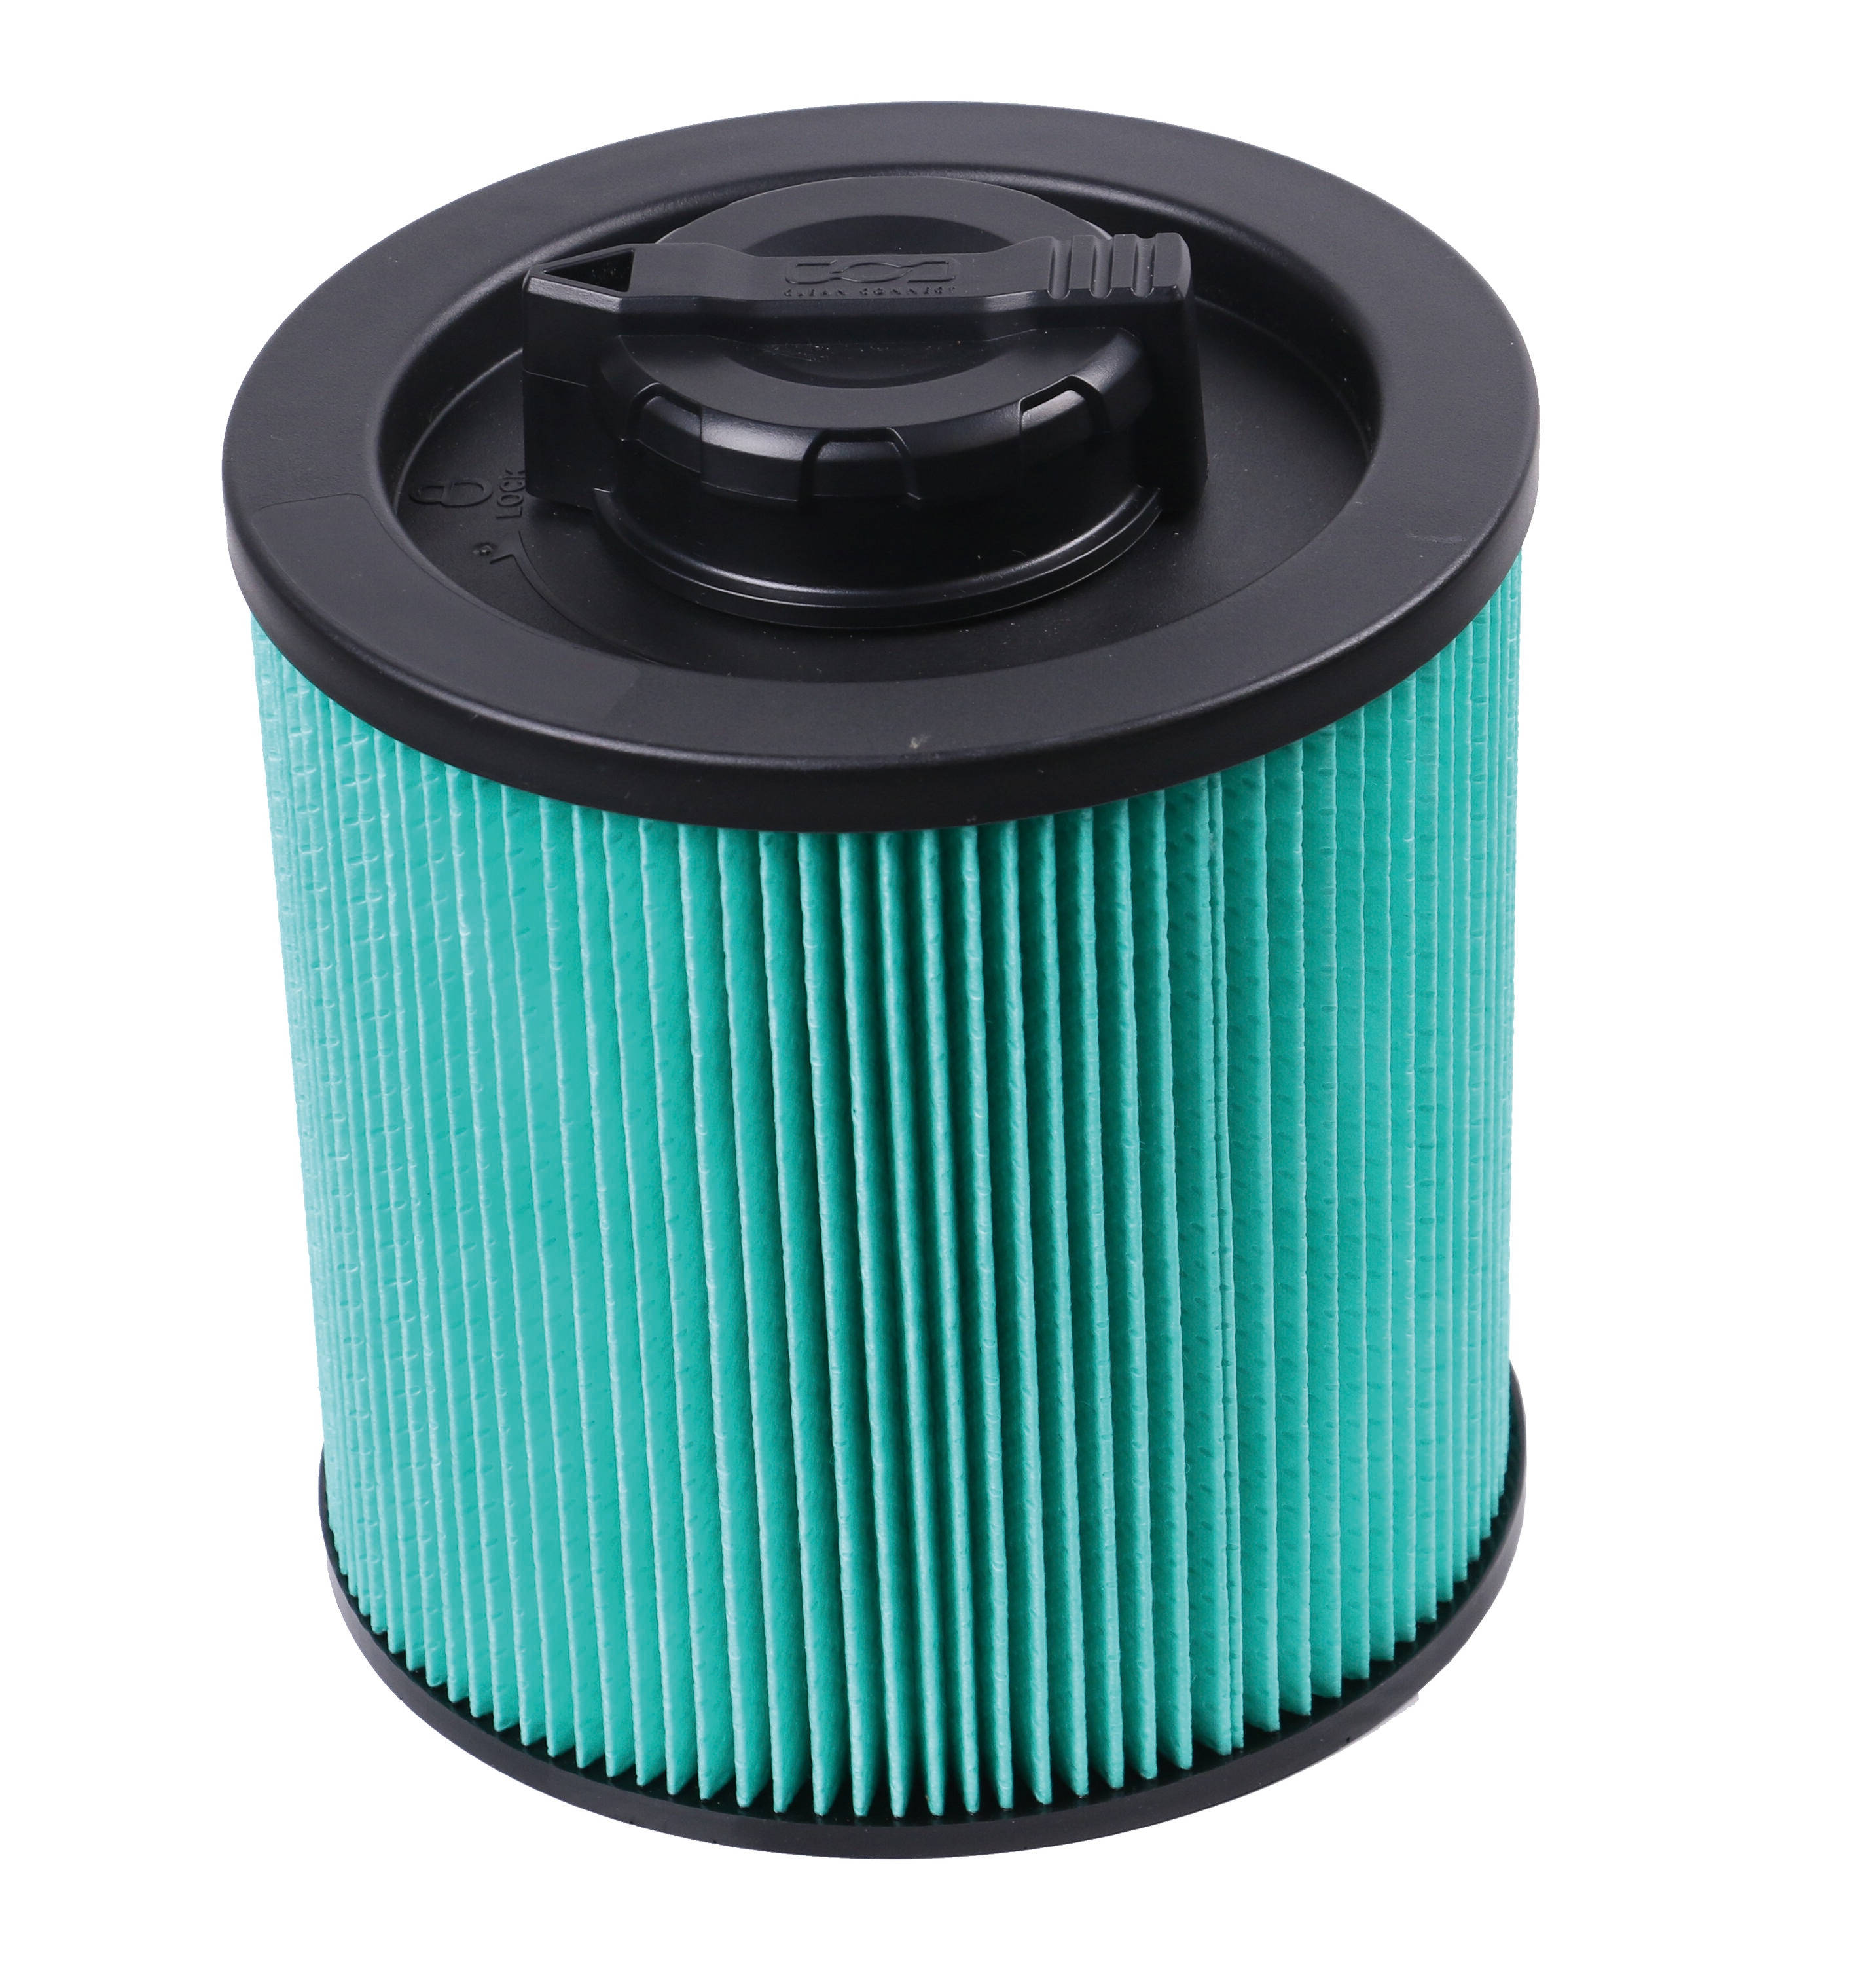 OAVQHLG3B Replacement Filter Vacuum Filter Replacement Compatible